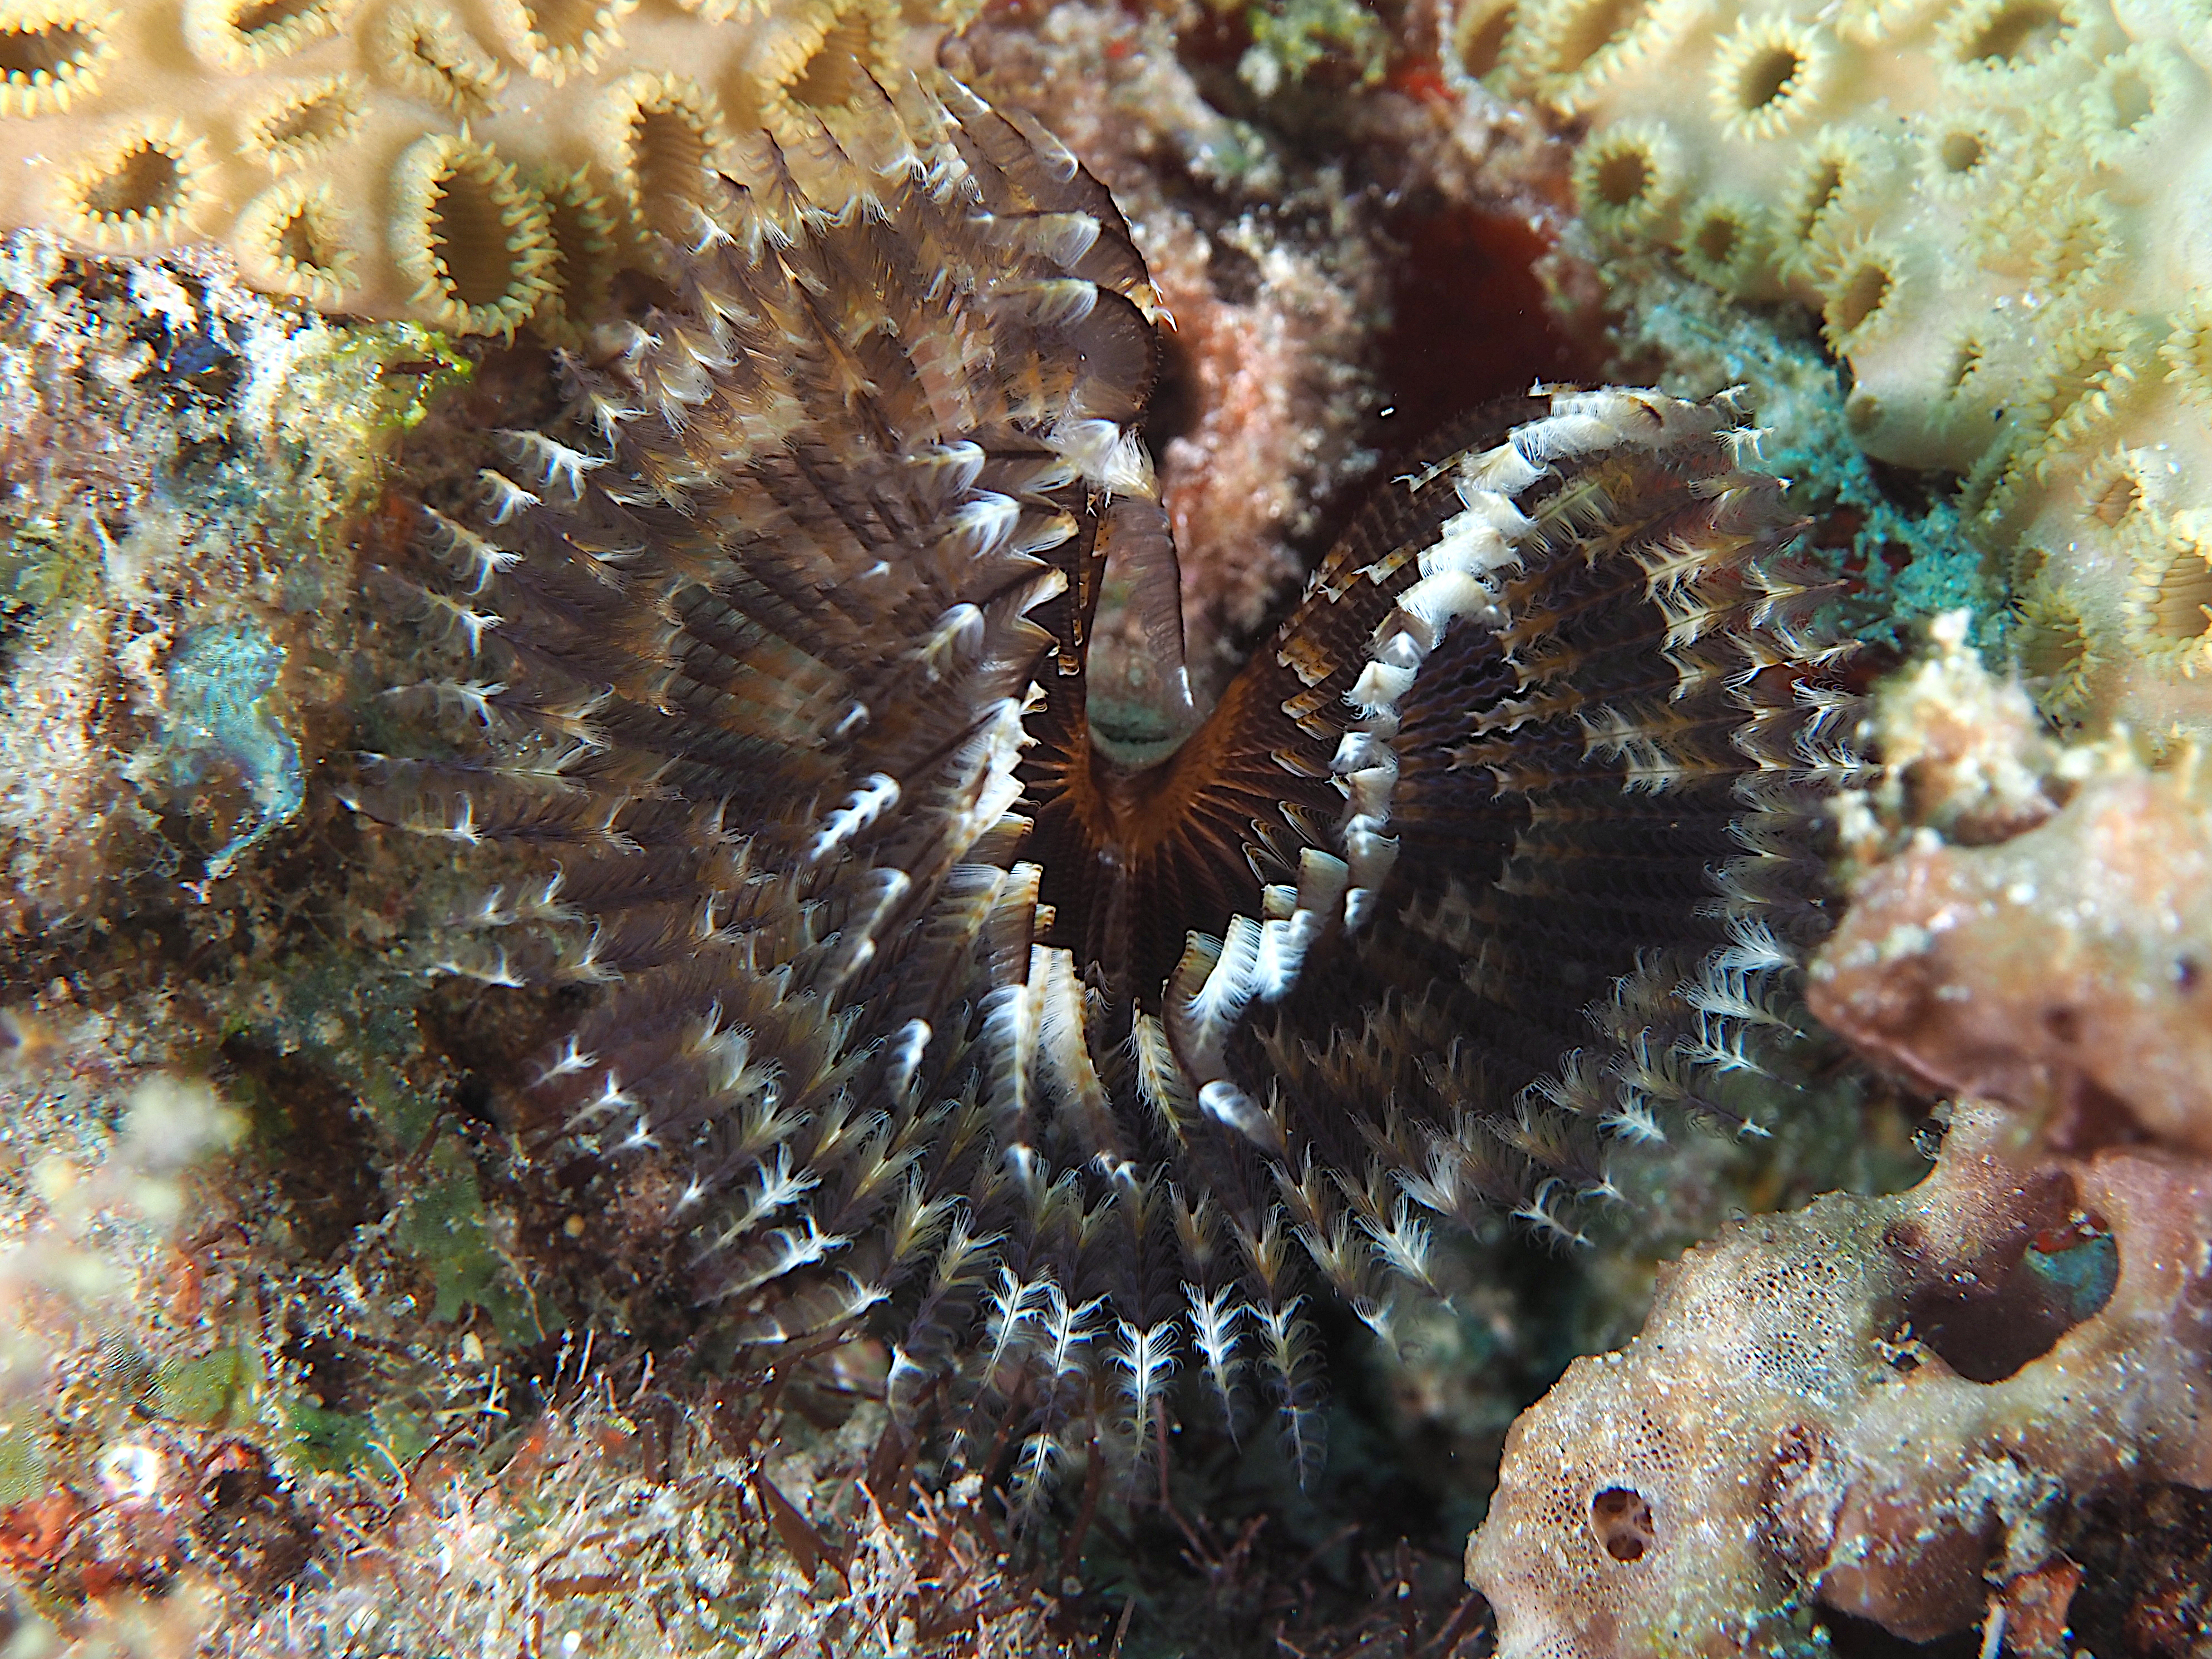 Black-Spotted Feather Duster - Branchiomma nigromaculata